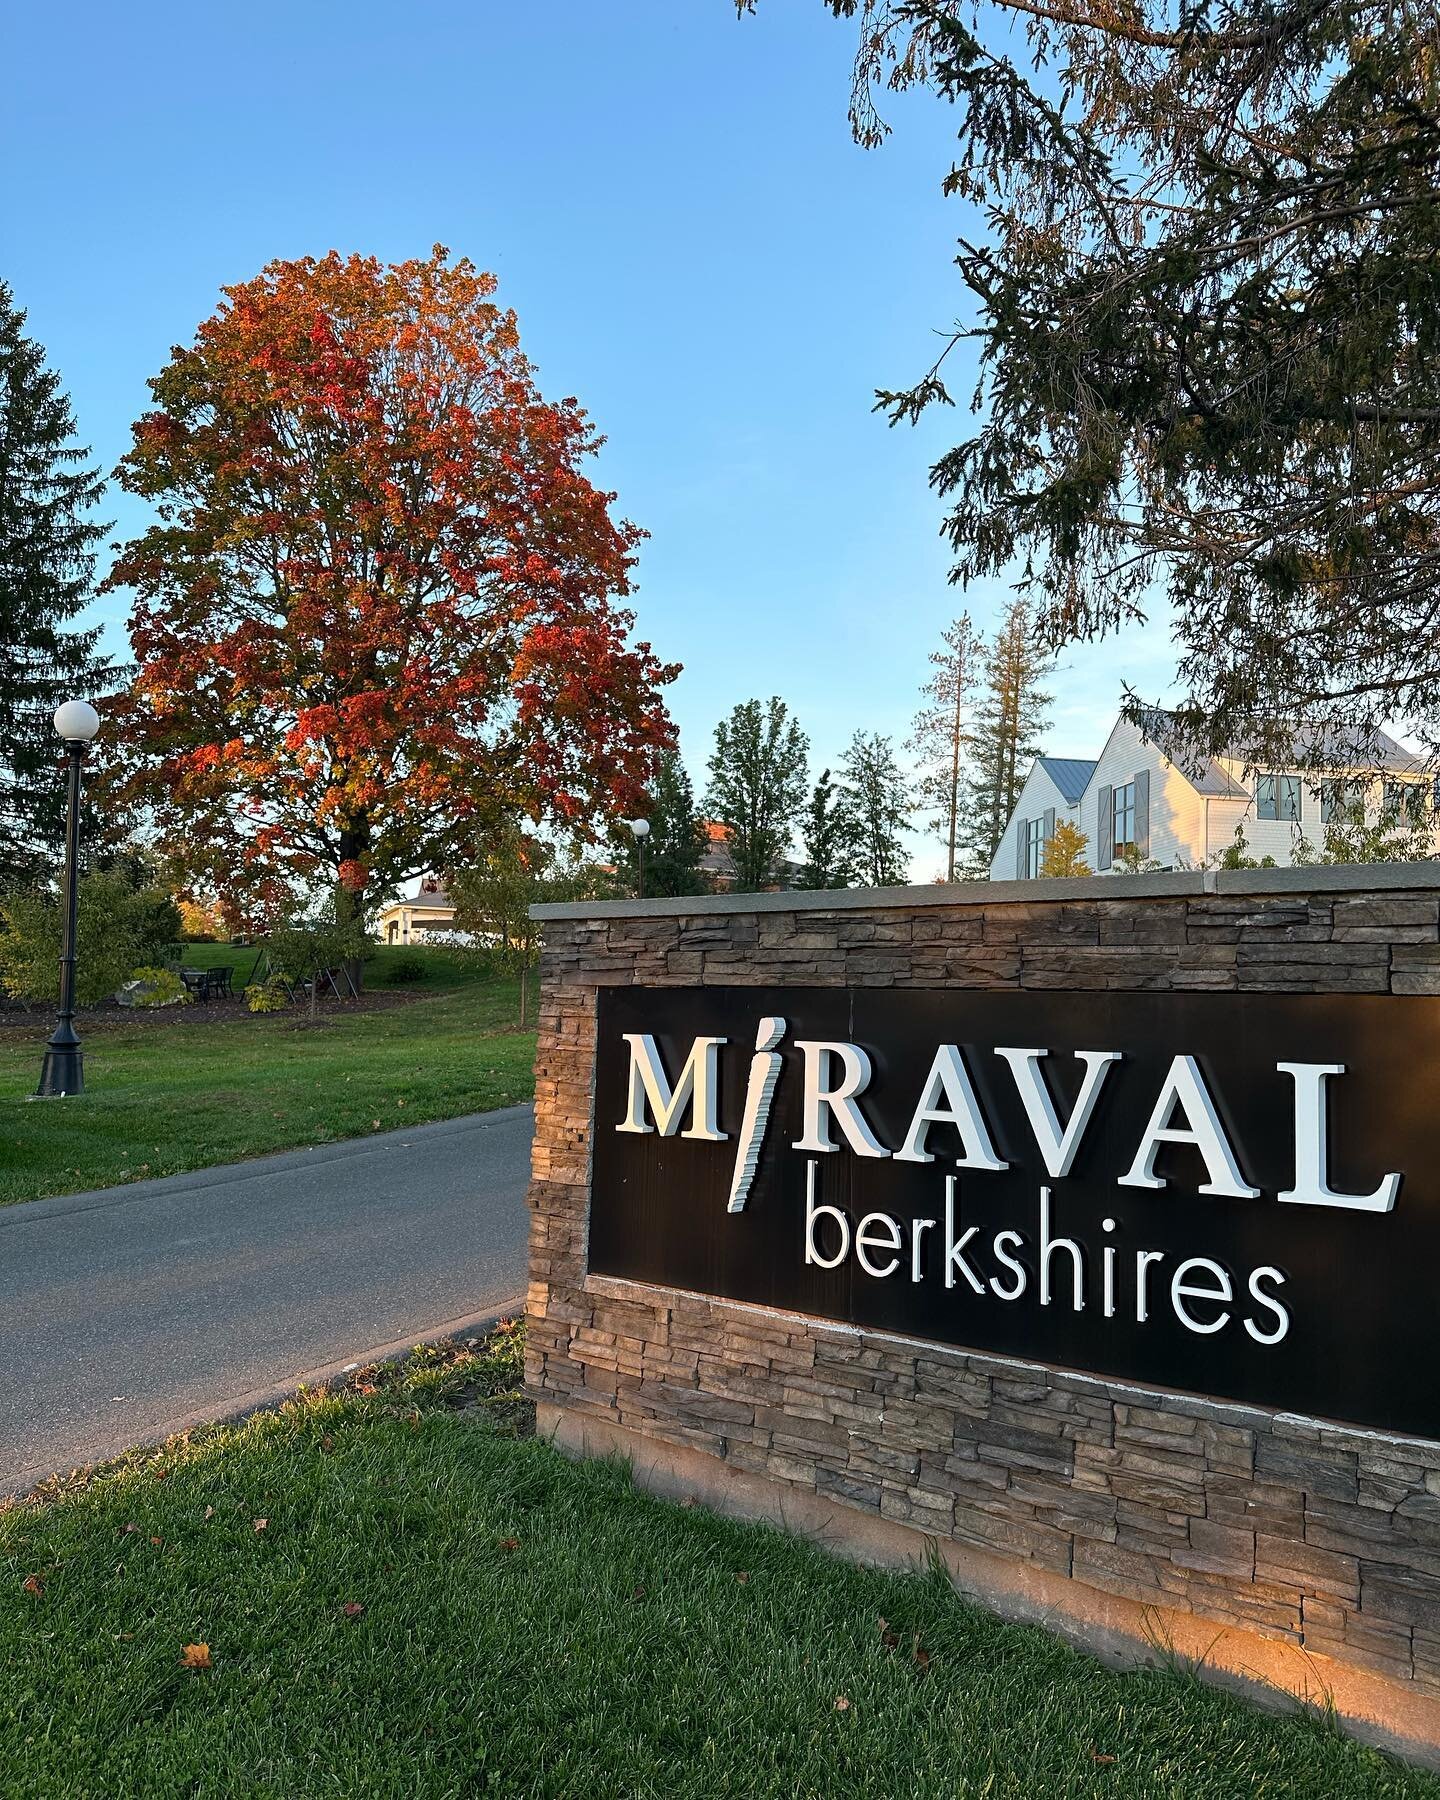 Lovely Miraval Berkshires🍂🍁🍃 A perfect place to relax and renew!  This beautiful wellness resort has wonderful classes and seminars all day, an all-inclusive meal plan and a fabulous spa!  You receive $175 daily resort credit AND an additional one